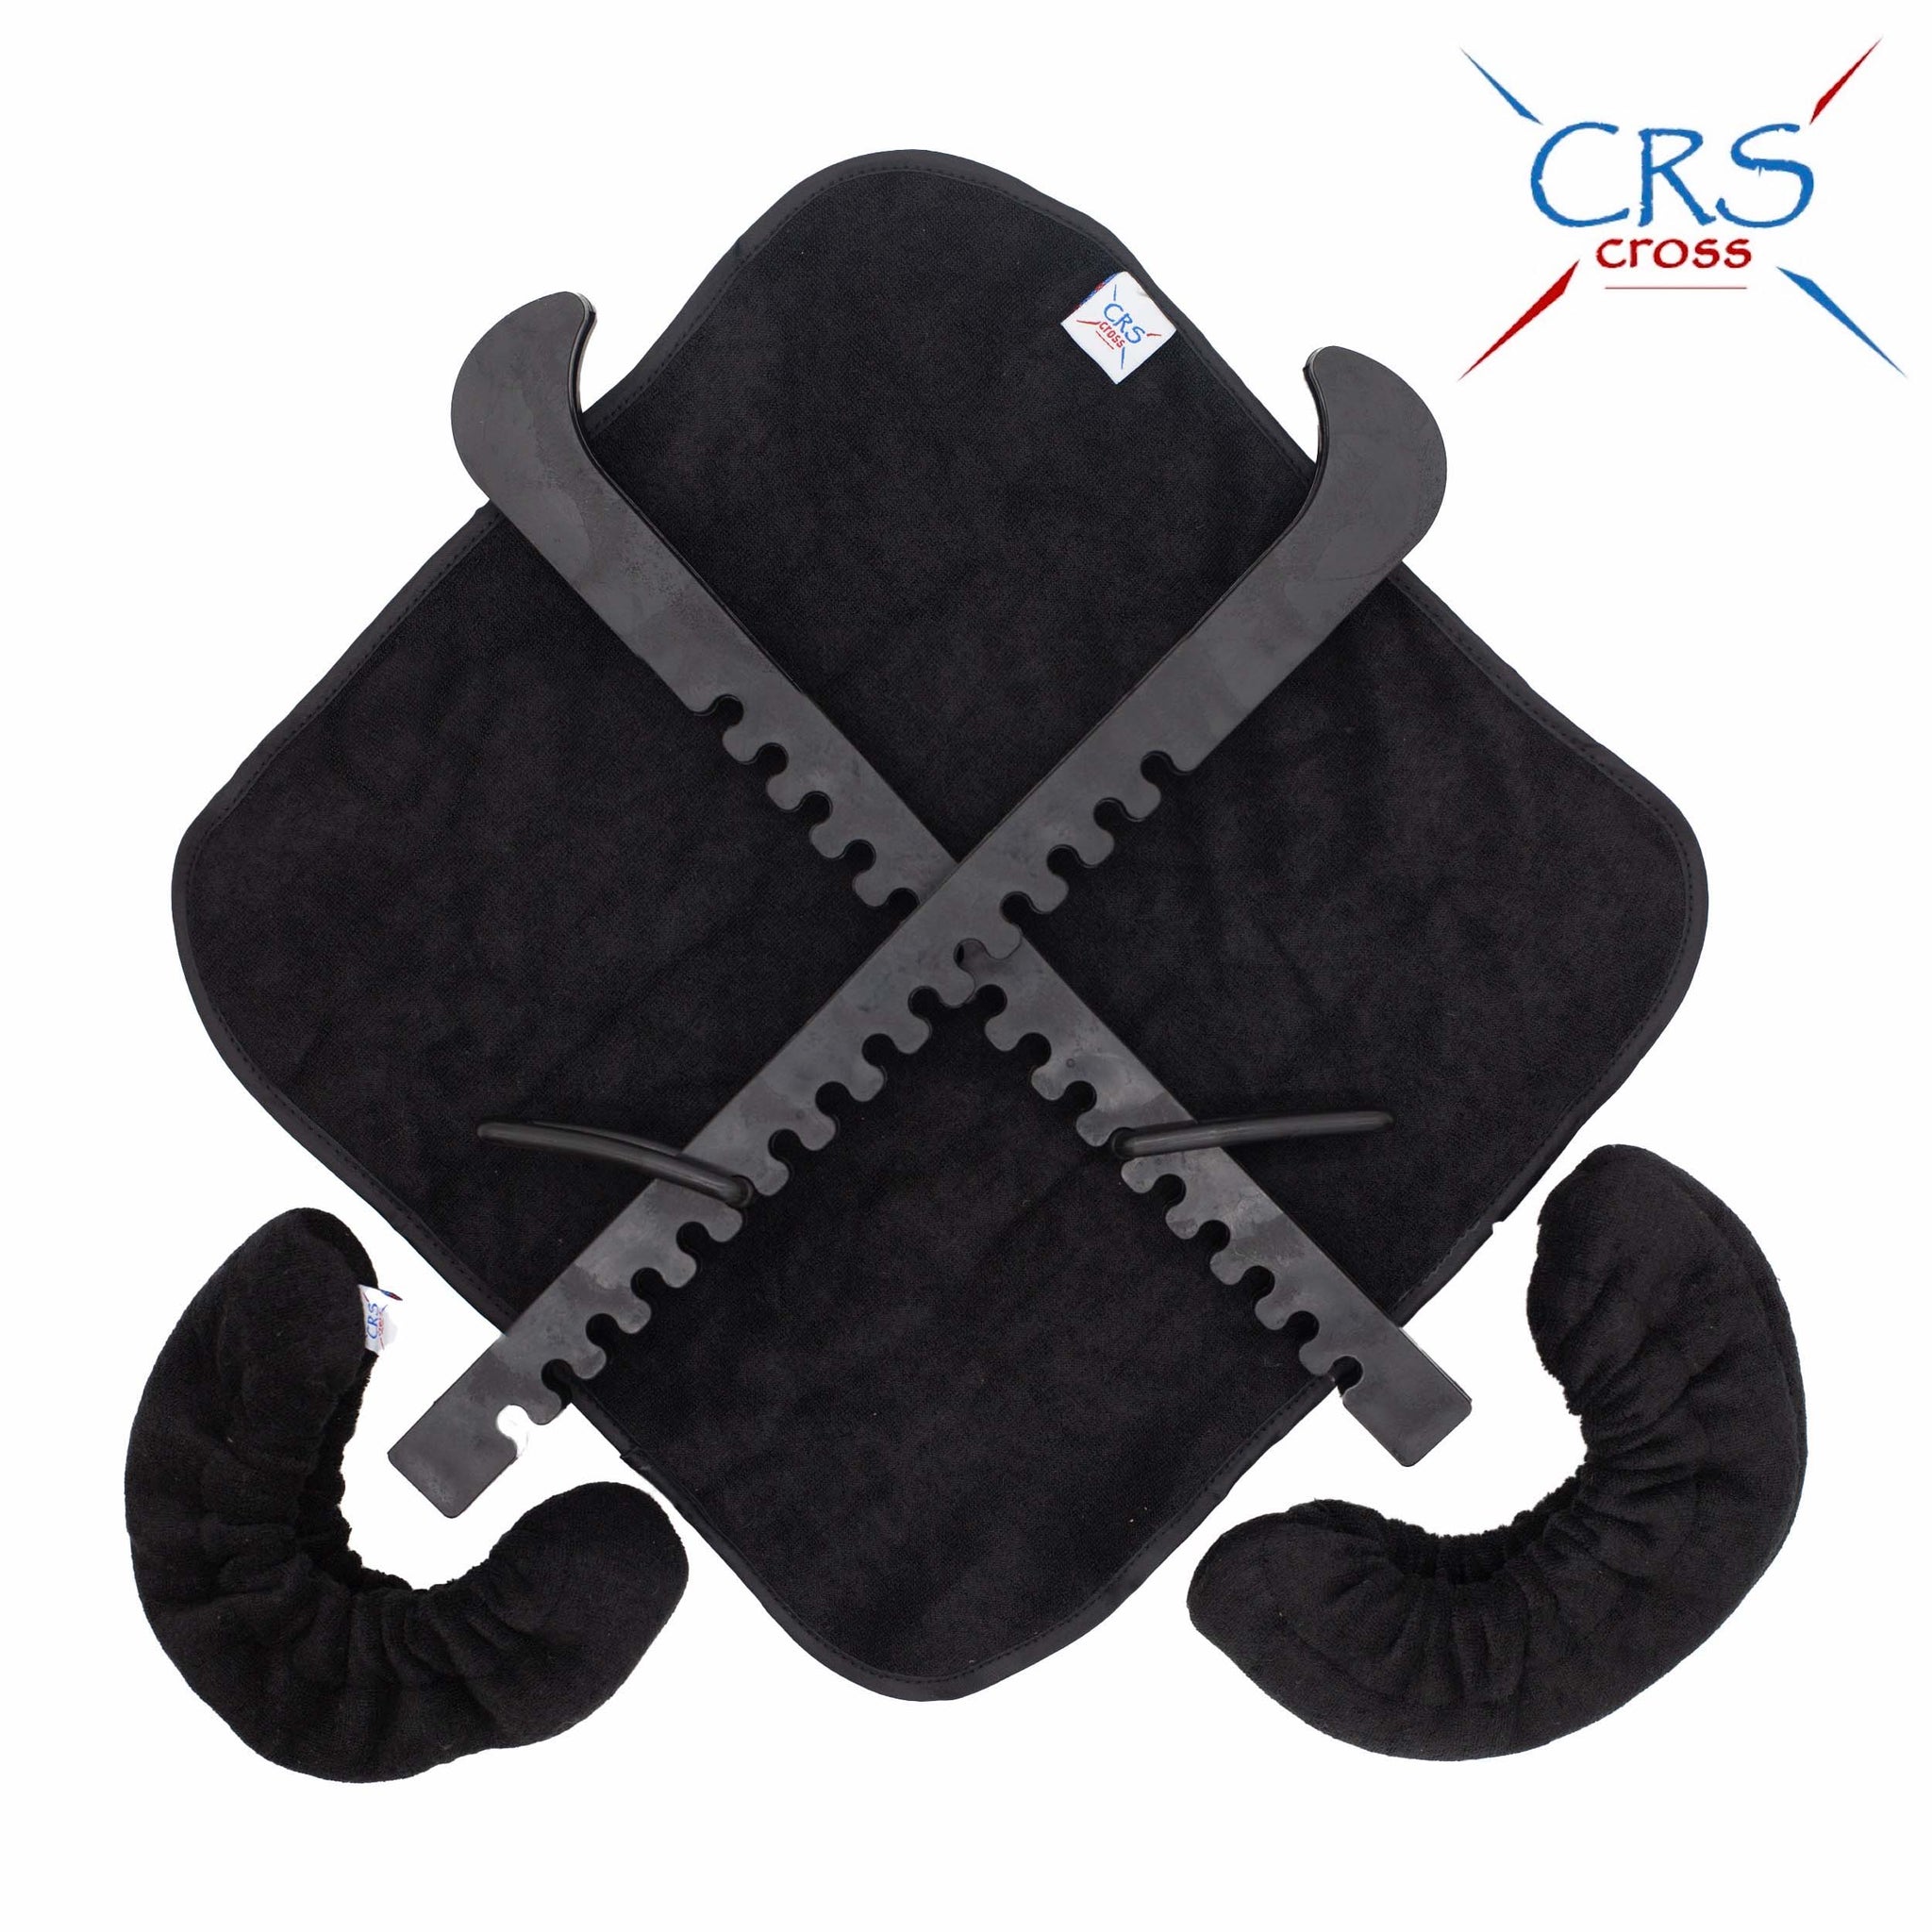 CRS Cross One-Piece Skate Guards, Soakers & Towel Gift Set